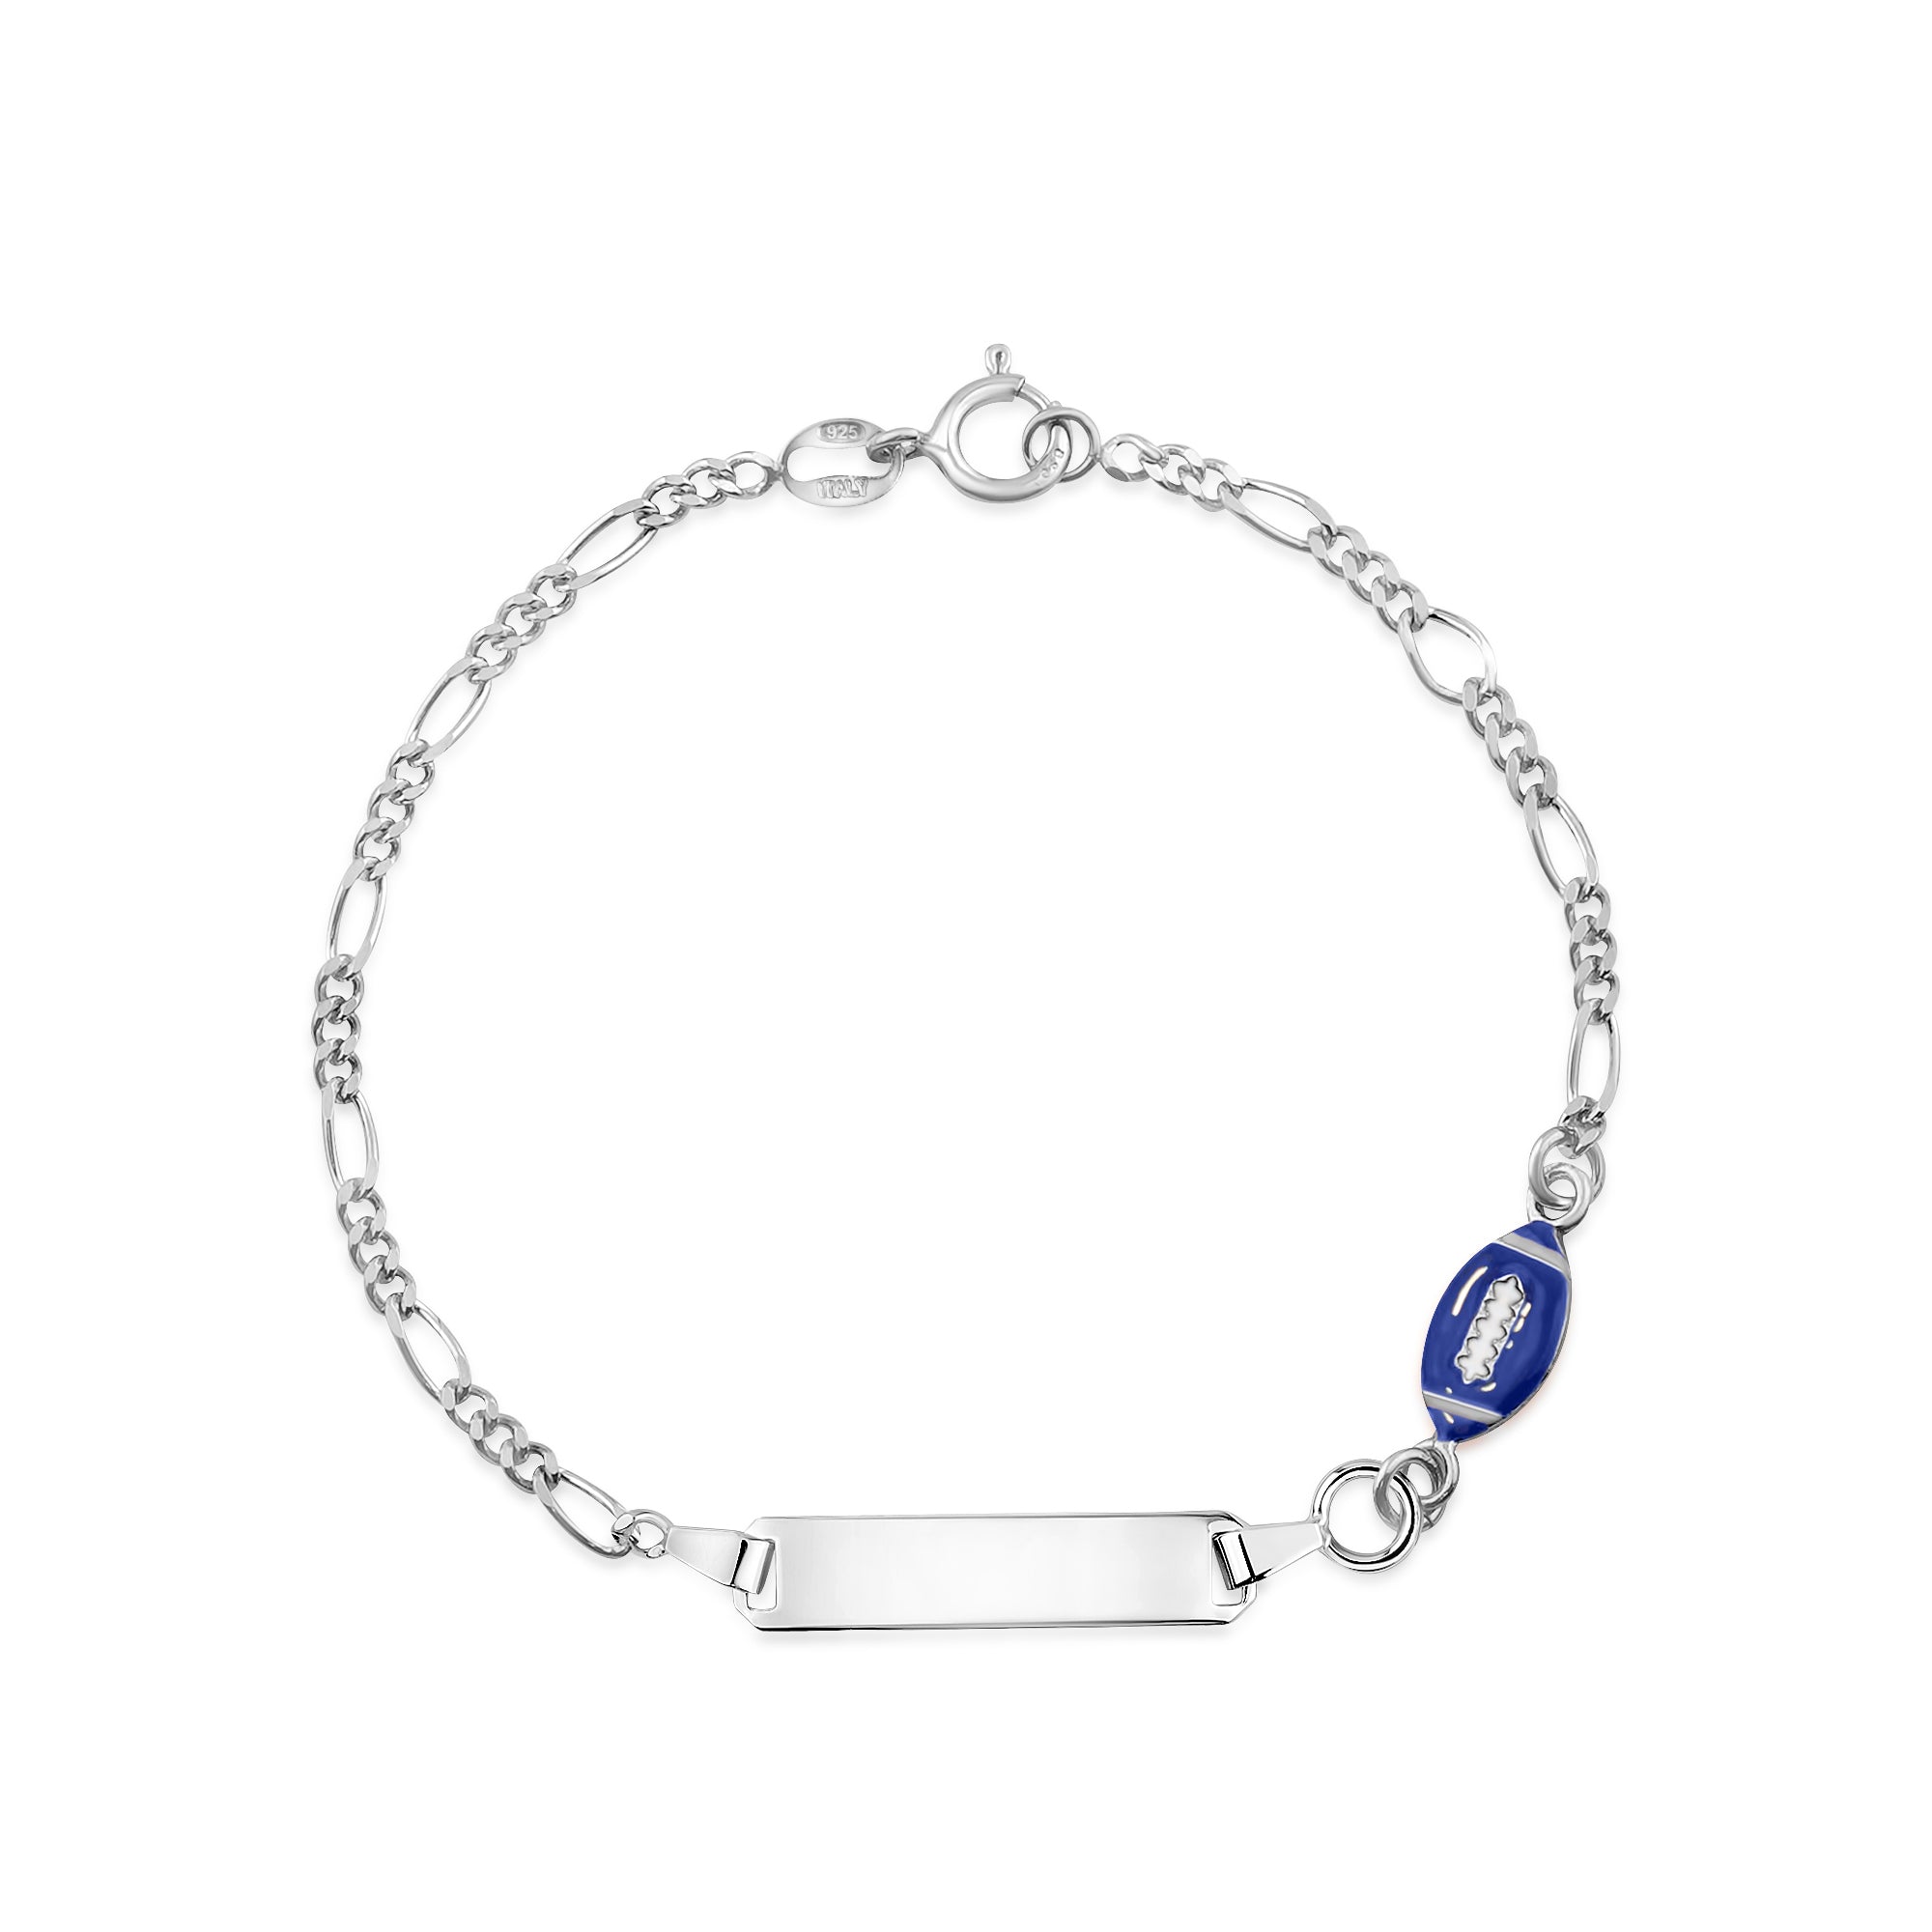 UNICORNJ Sterling Silver 925 Engravable ID Bracelet Figaro Chain for Boys Girls with Enamel Charm 6.5"